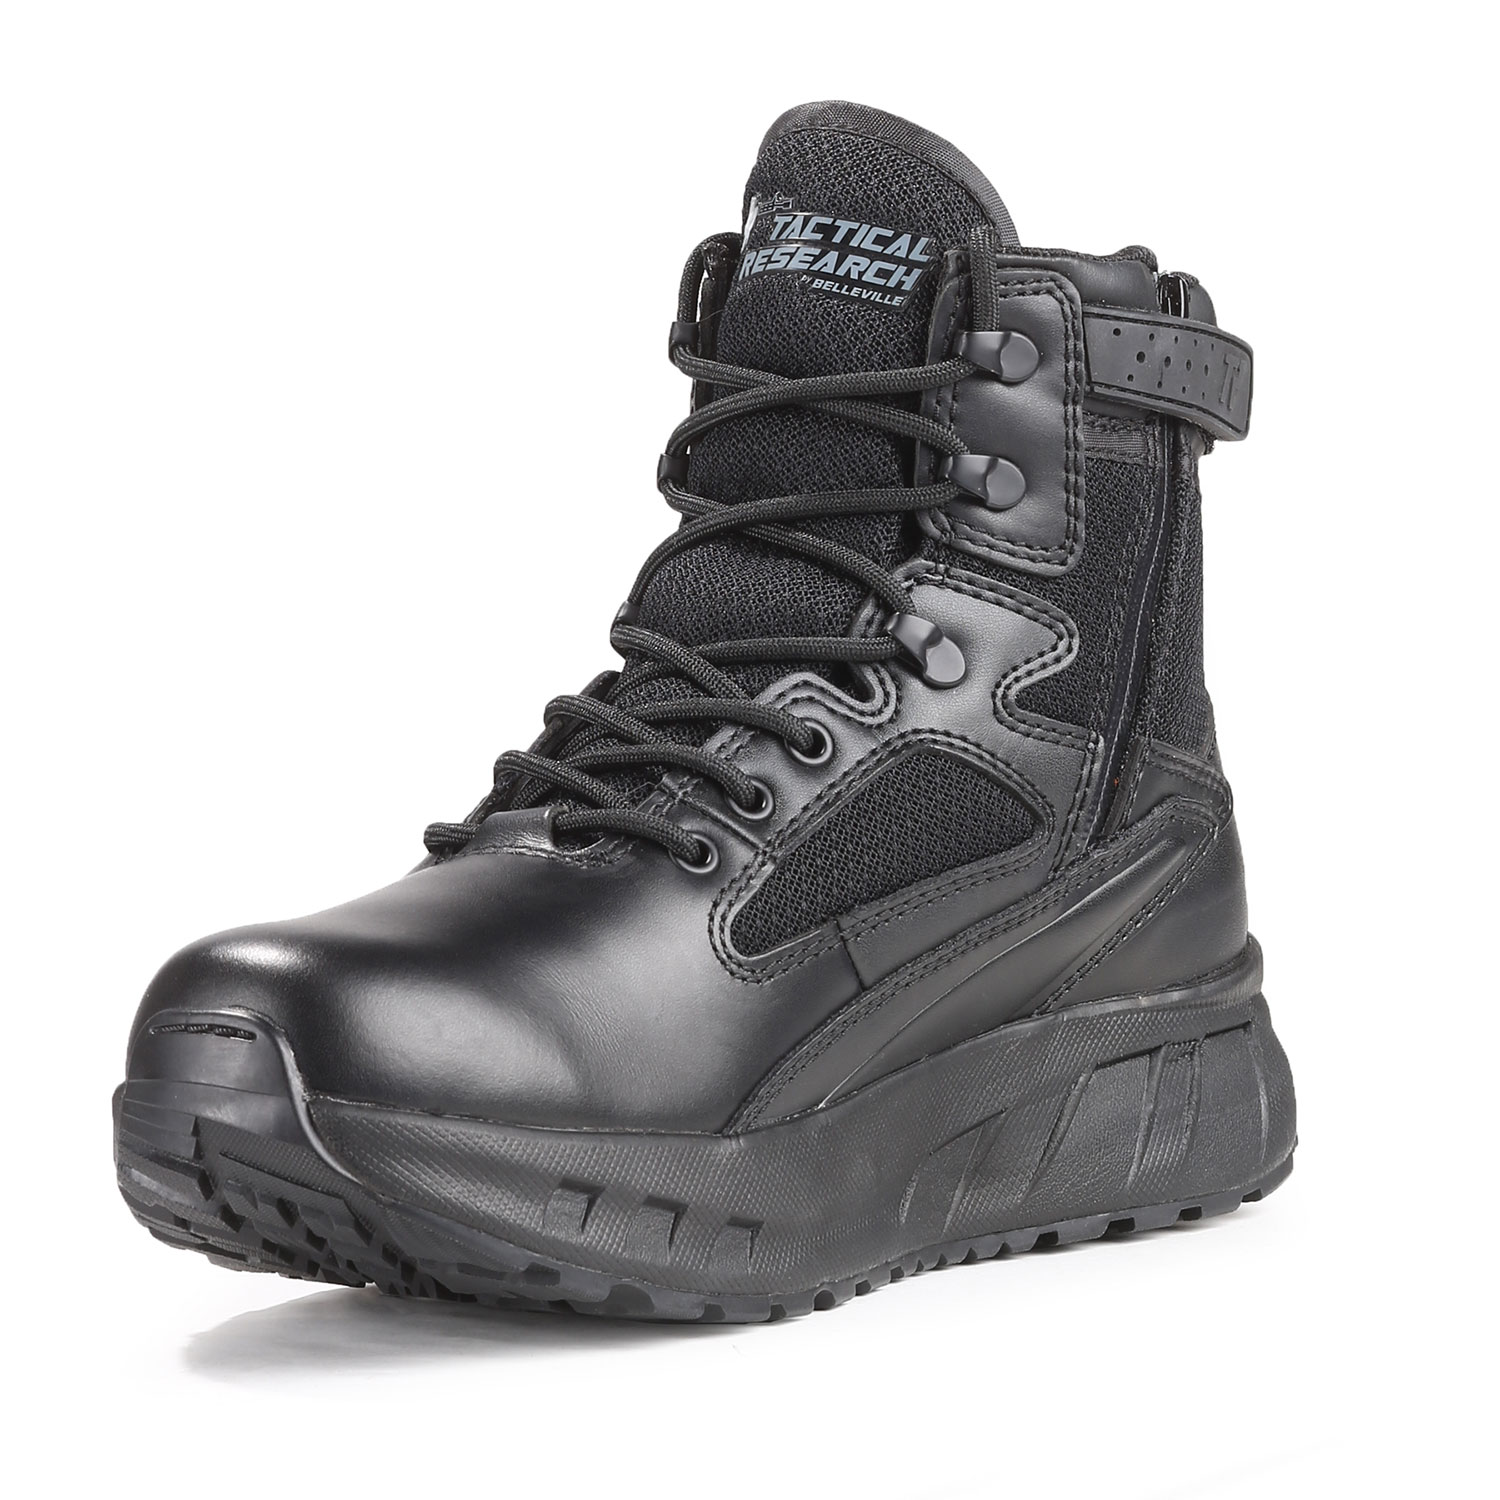 Tactical Research MAXX 6" Side Zip Boot